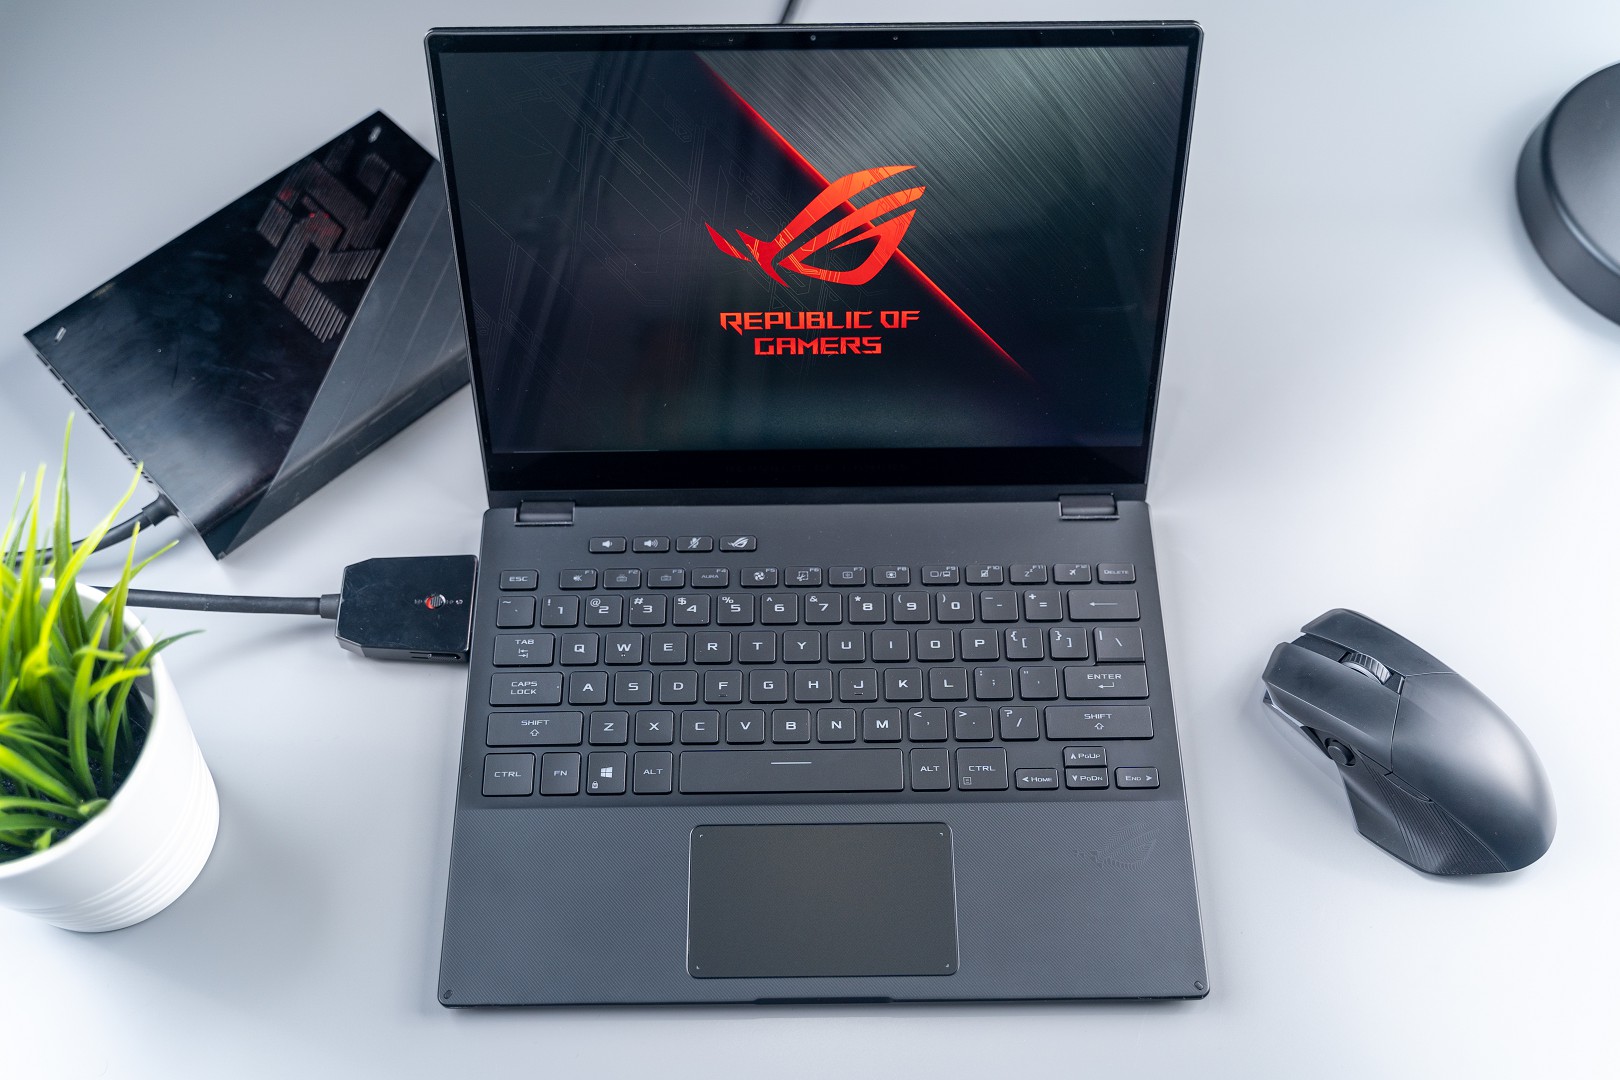 The Asus ROG Flow X13 Is a Gaming Laptop With a Portable External GPU